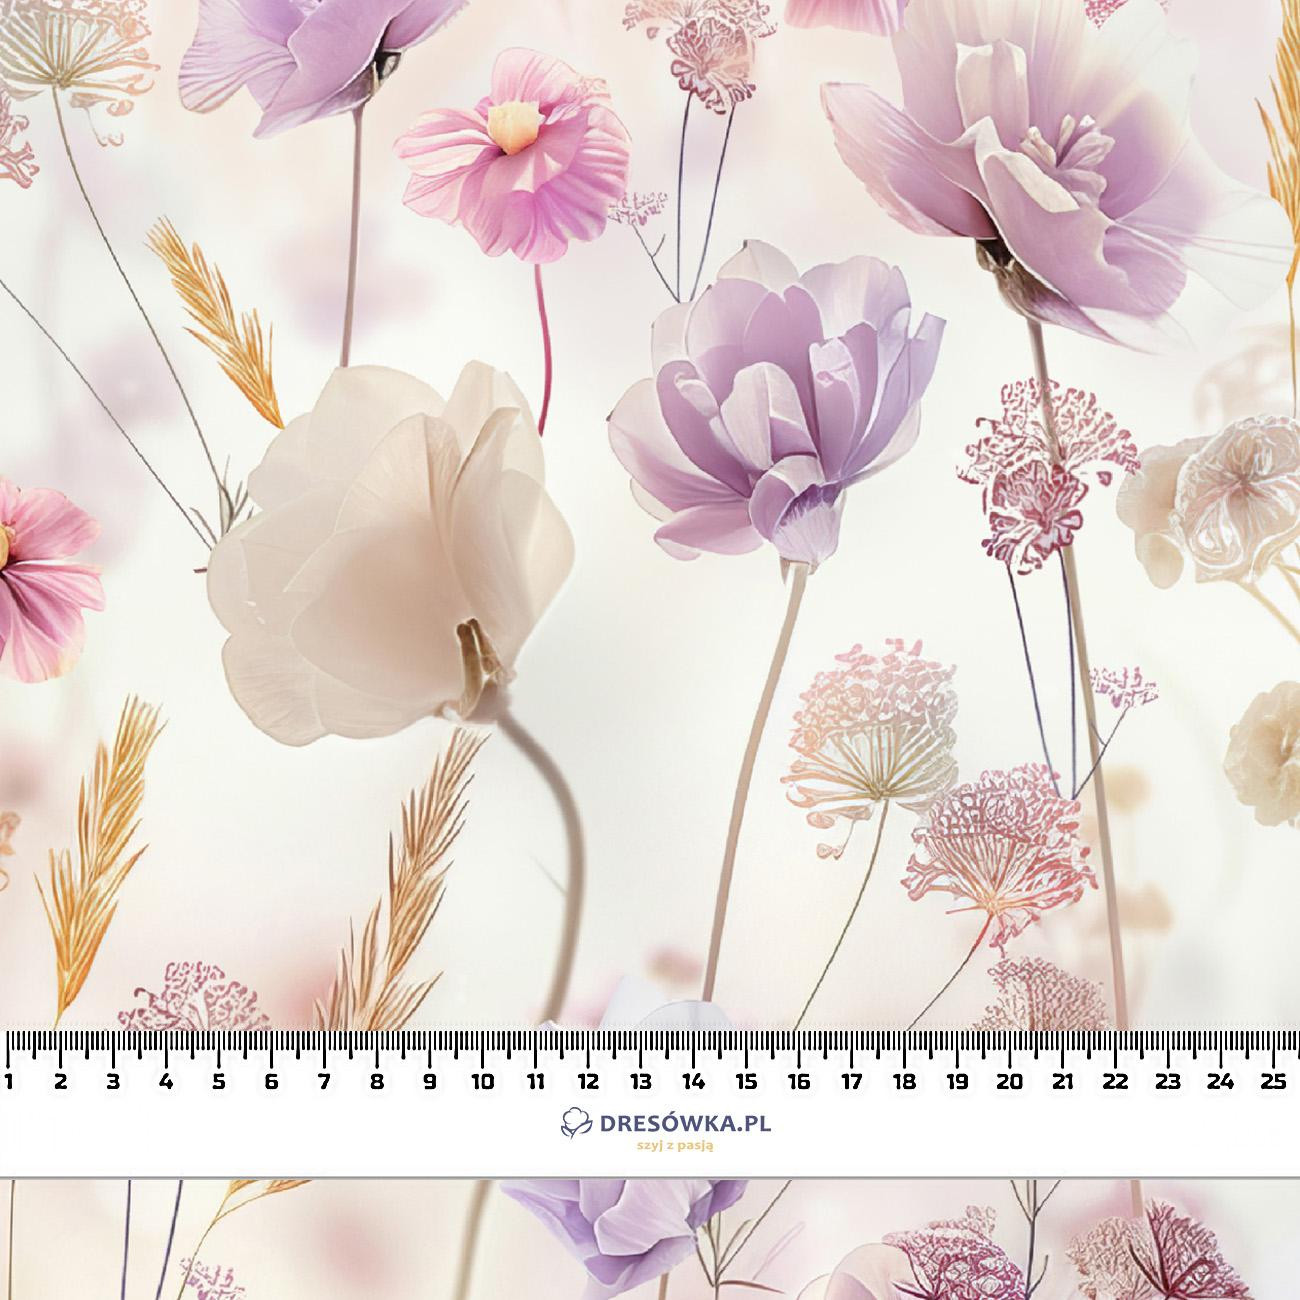 FLOWERS wz.10 - quick-drying woven fabric